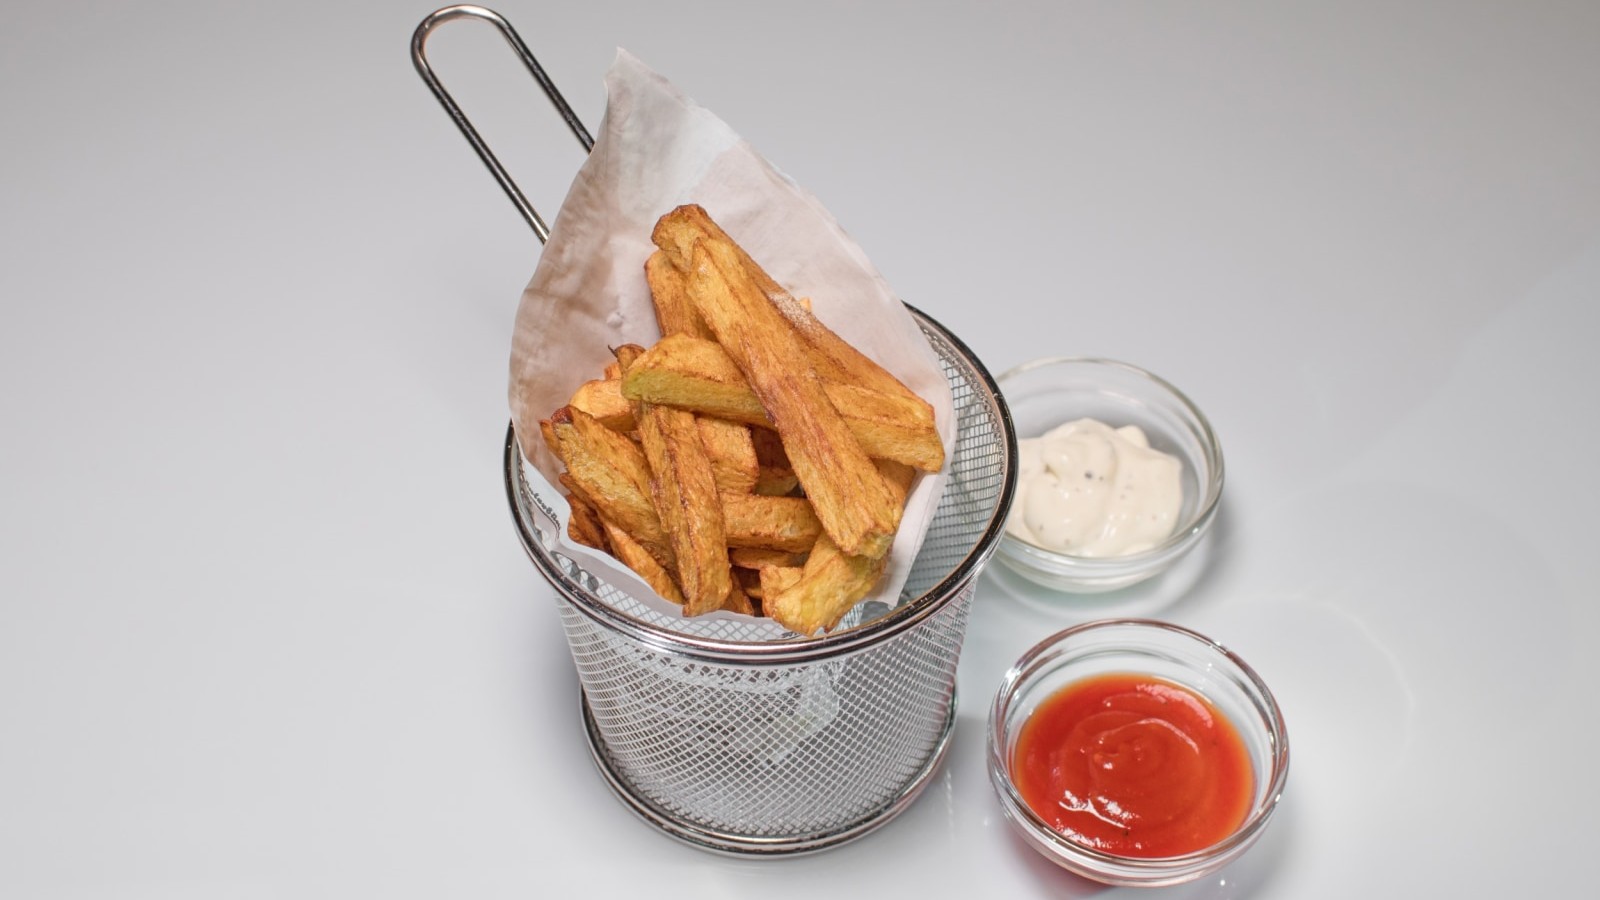 Image of French fries with White Truffle Spice